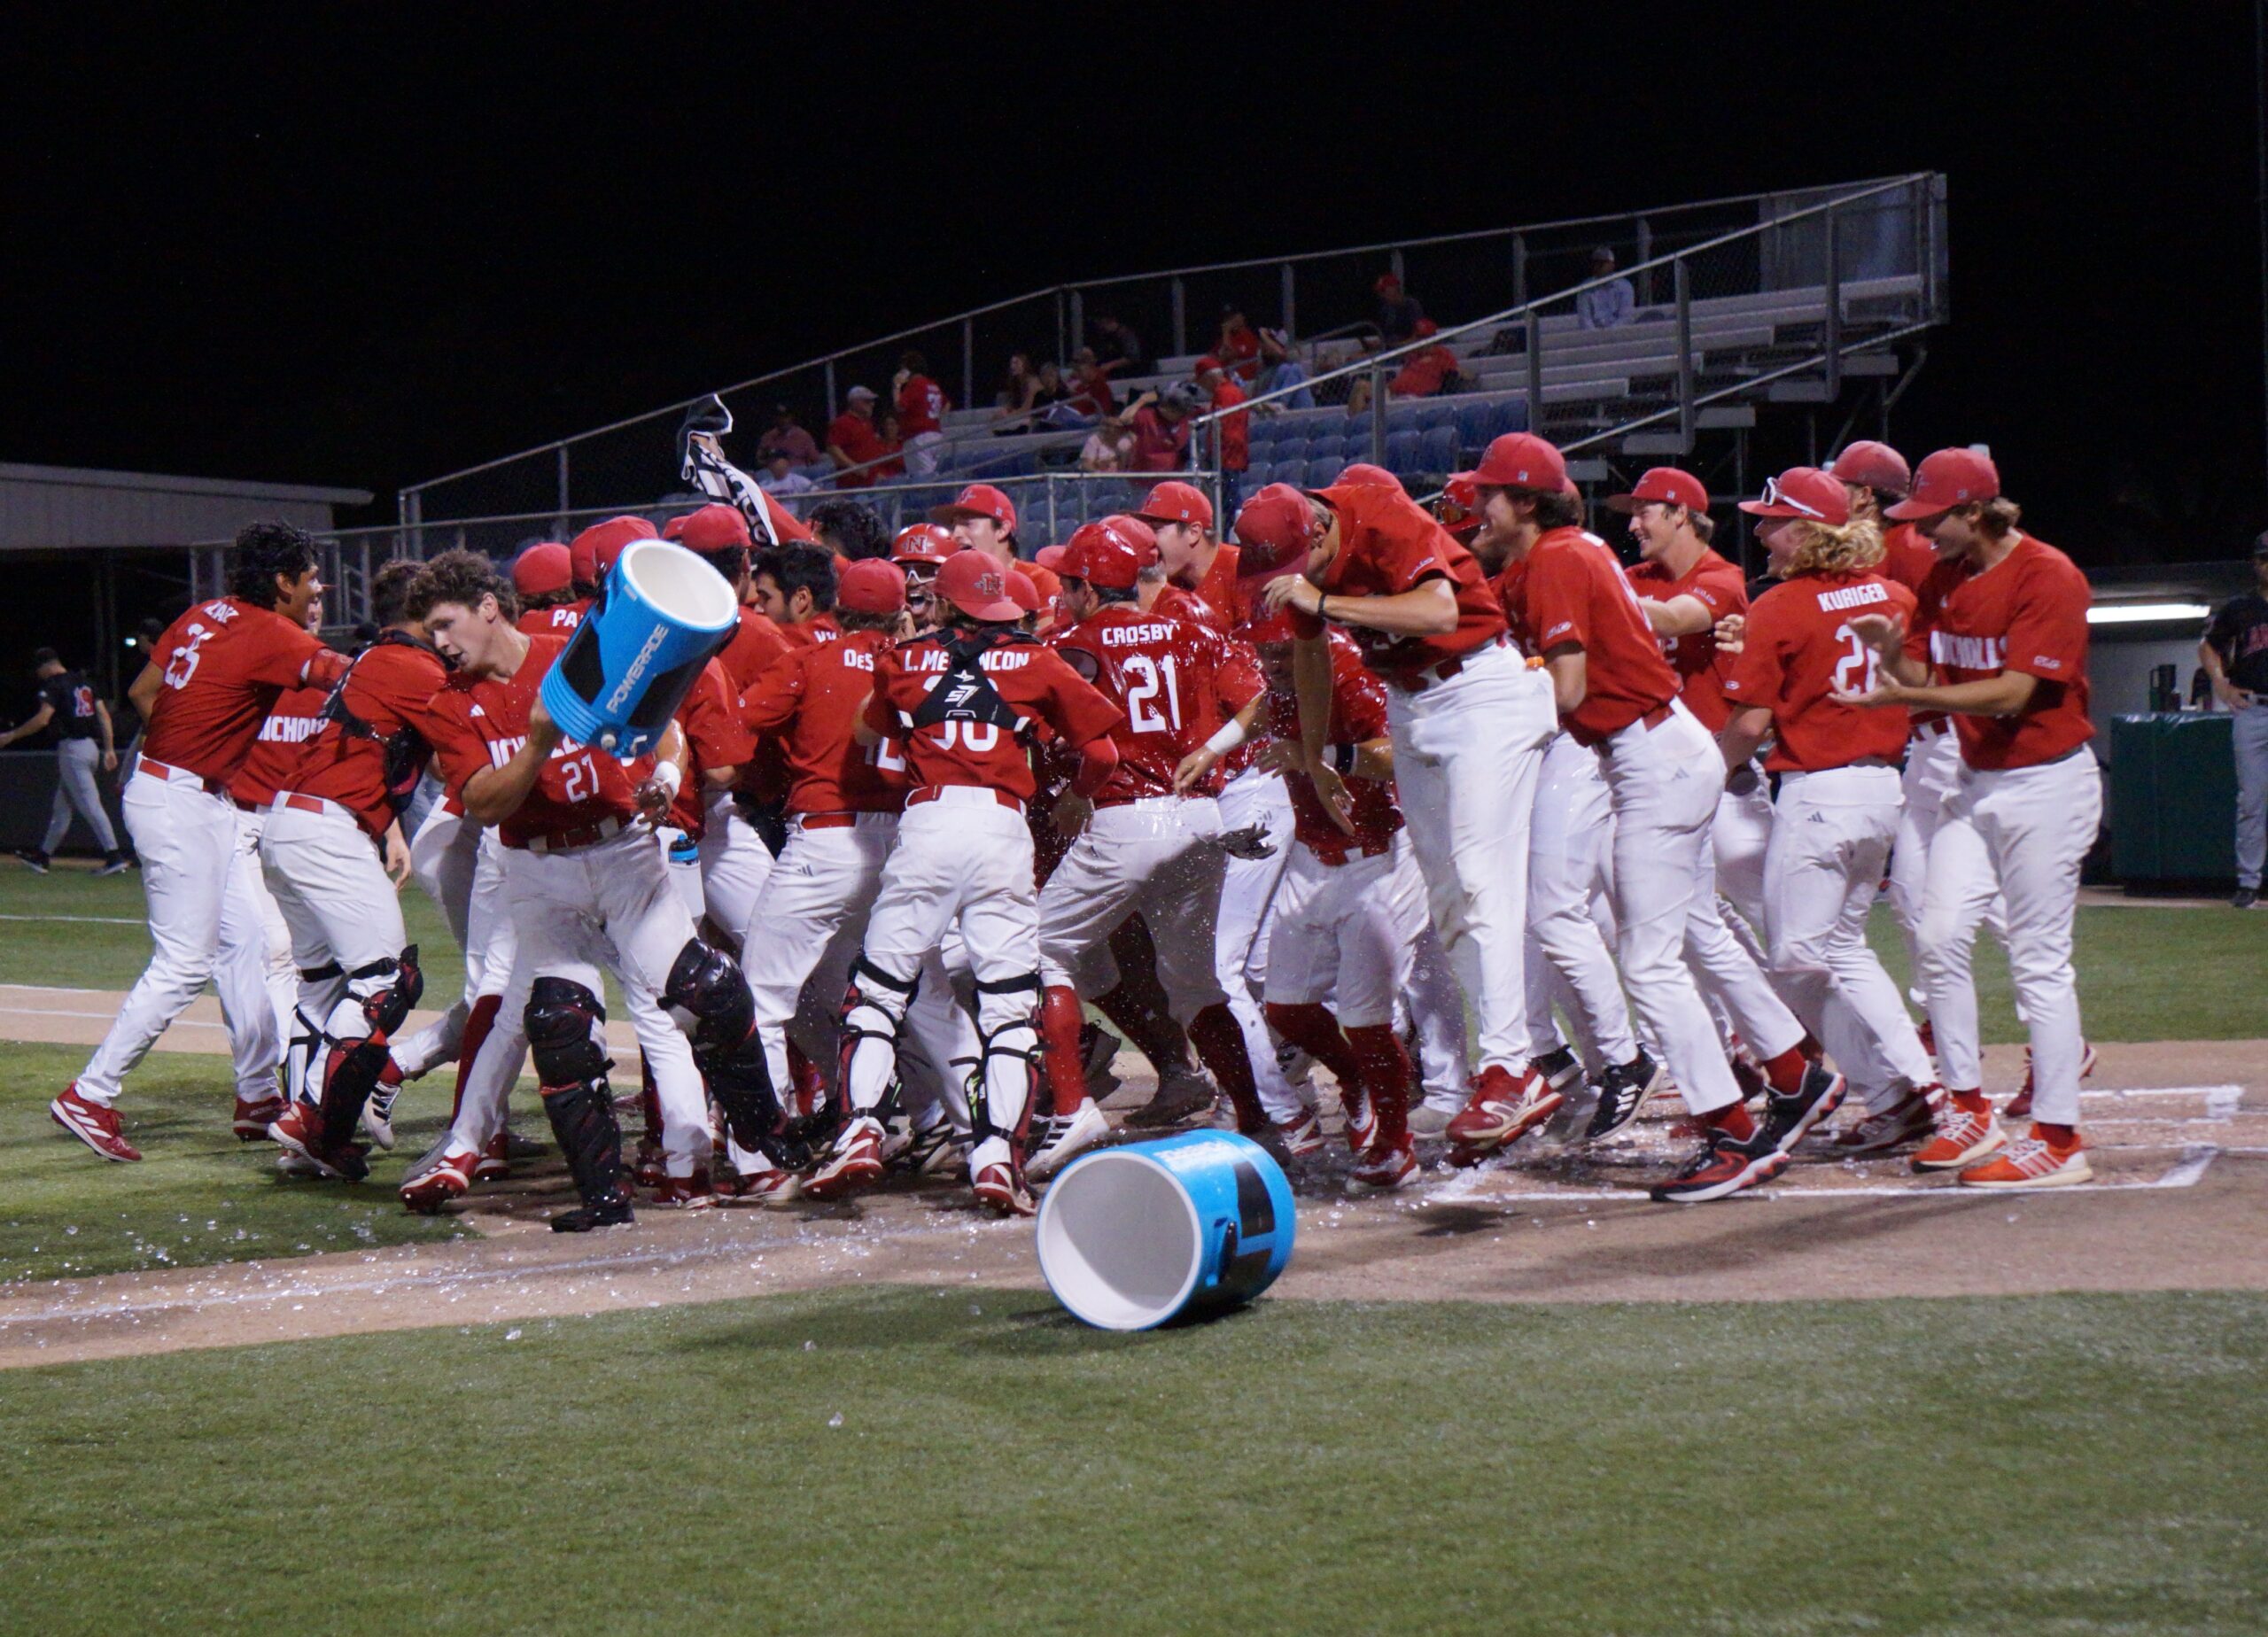 Thumbnail for Anderson’s walk-off home run gives Nicholls 5-4 win in opener of showdown series with Lamar